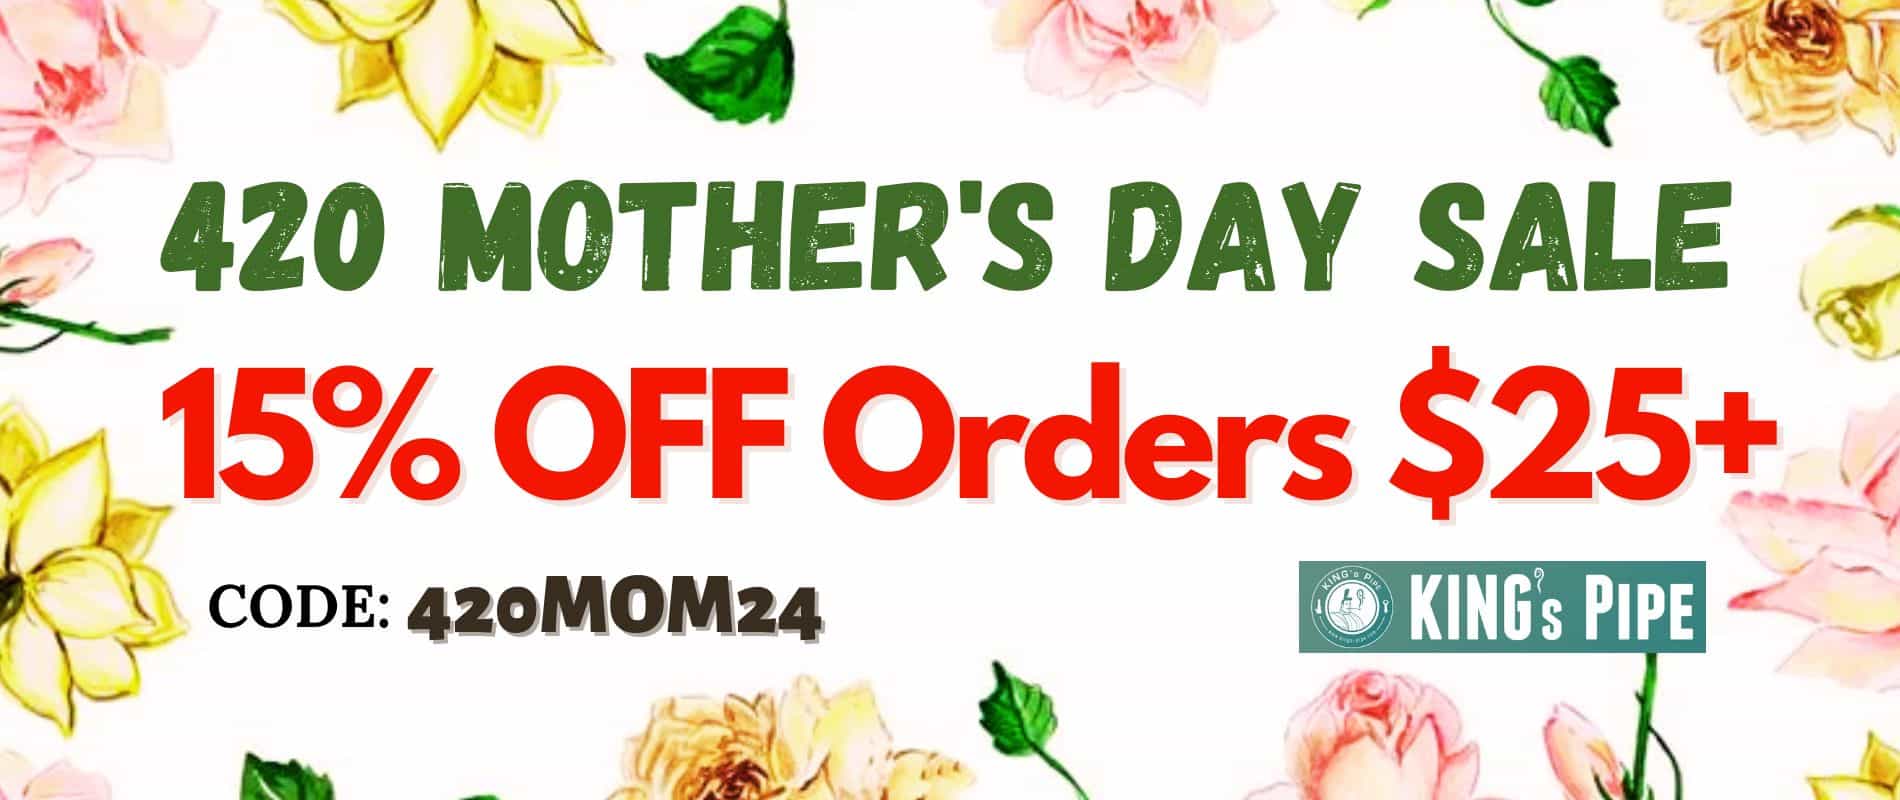 420 mother's day sale on king's pipe online smoke shop for bongs and vape pens